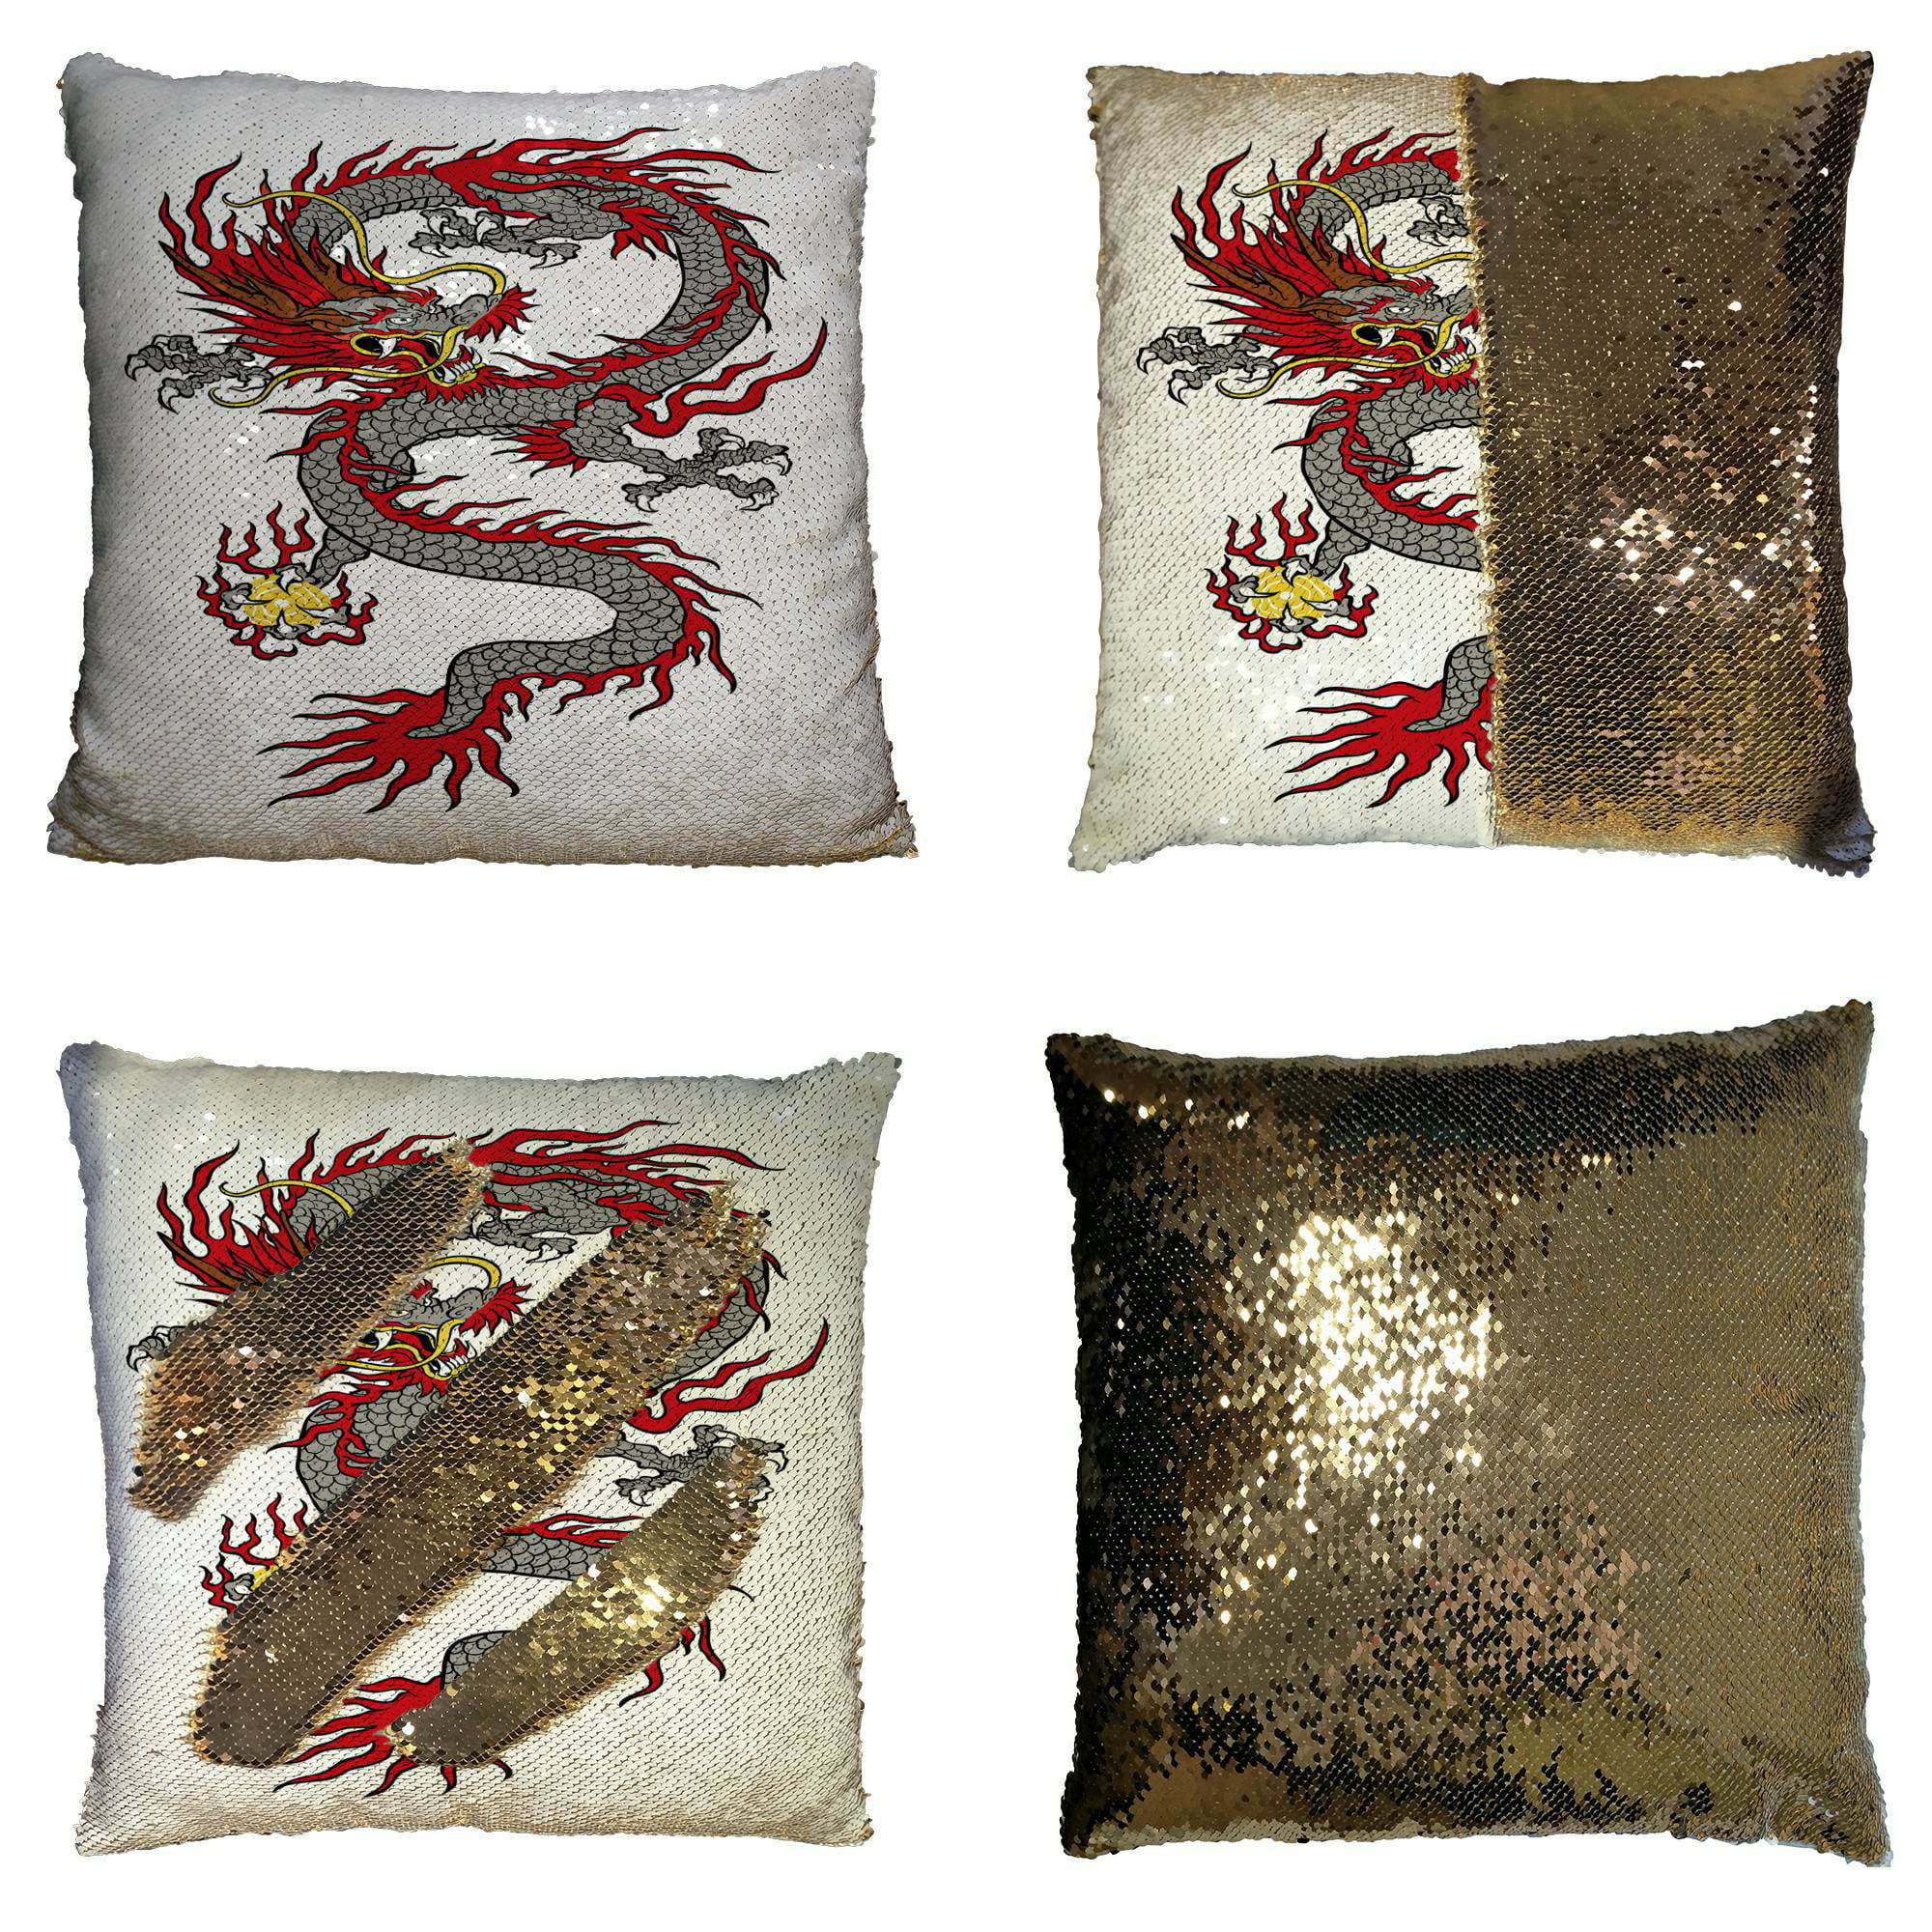 Decorative Throw Pillow Case Cushion Cover Dragon 20x30 inch one side